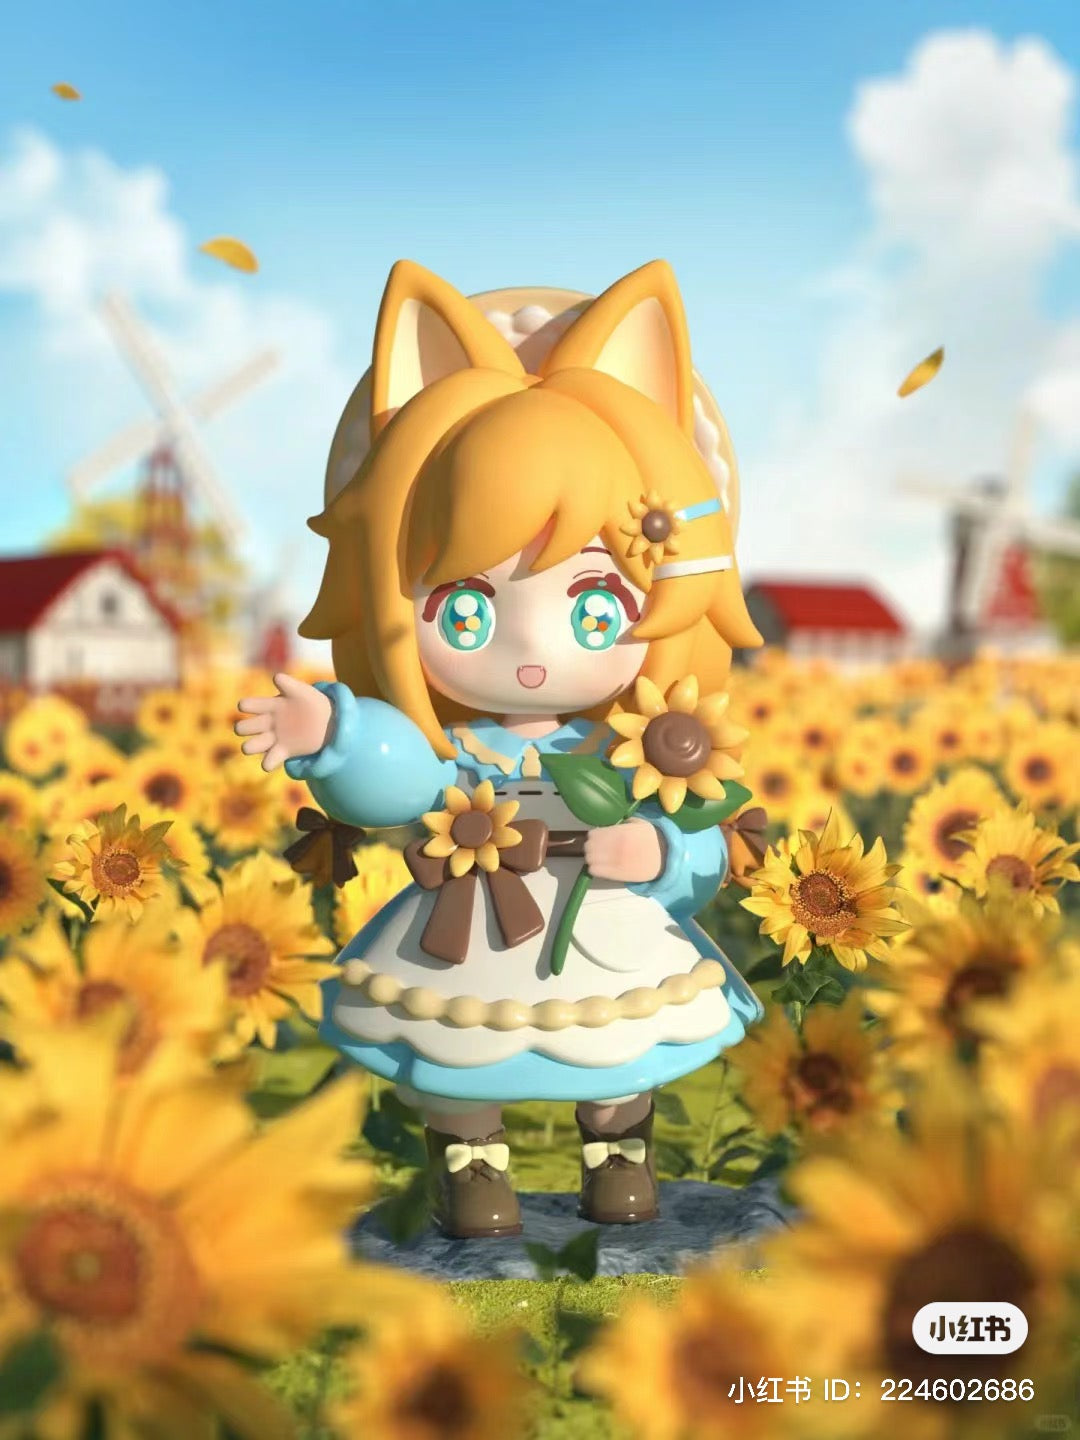 Alt text: Cartoon character holding sunflowers in a field from NINIZEE The Secret Realm of Flowers Blind Box Series.